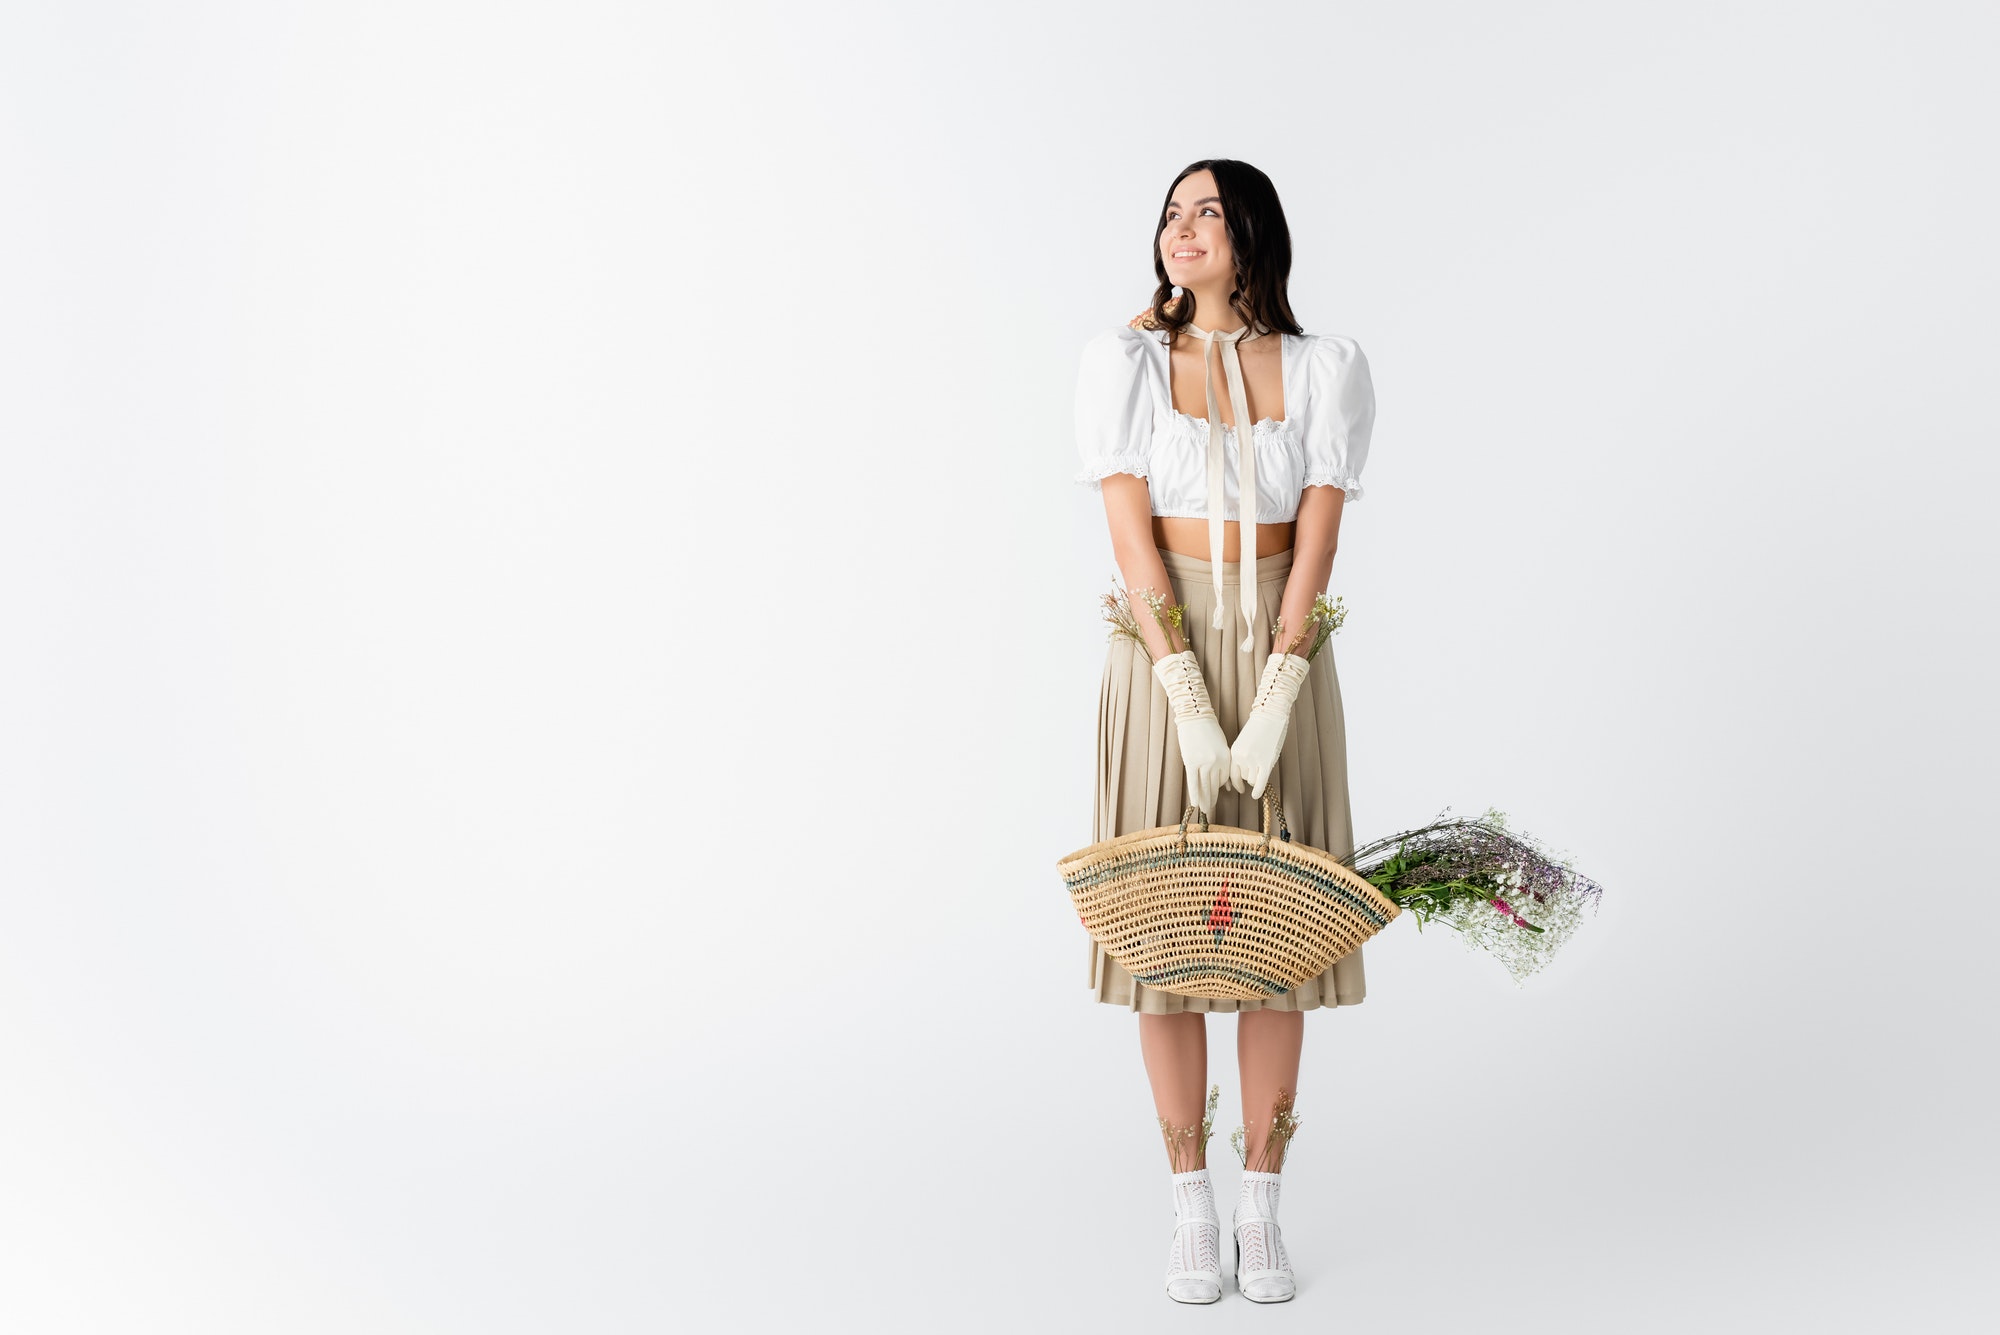 full length of joyful young woman in spring outfit holding straw bag with flowers on white